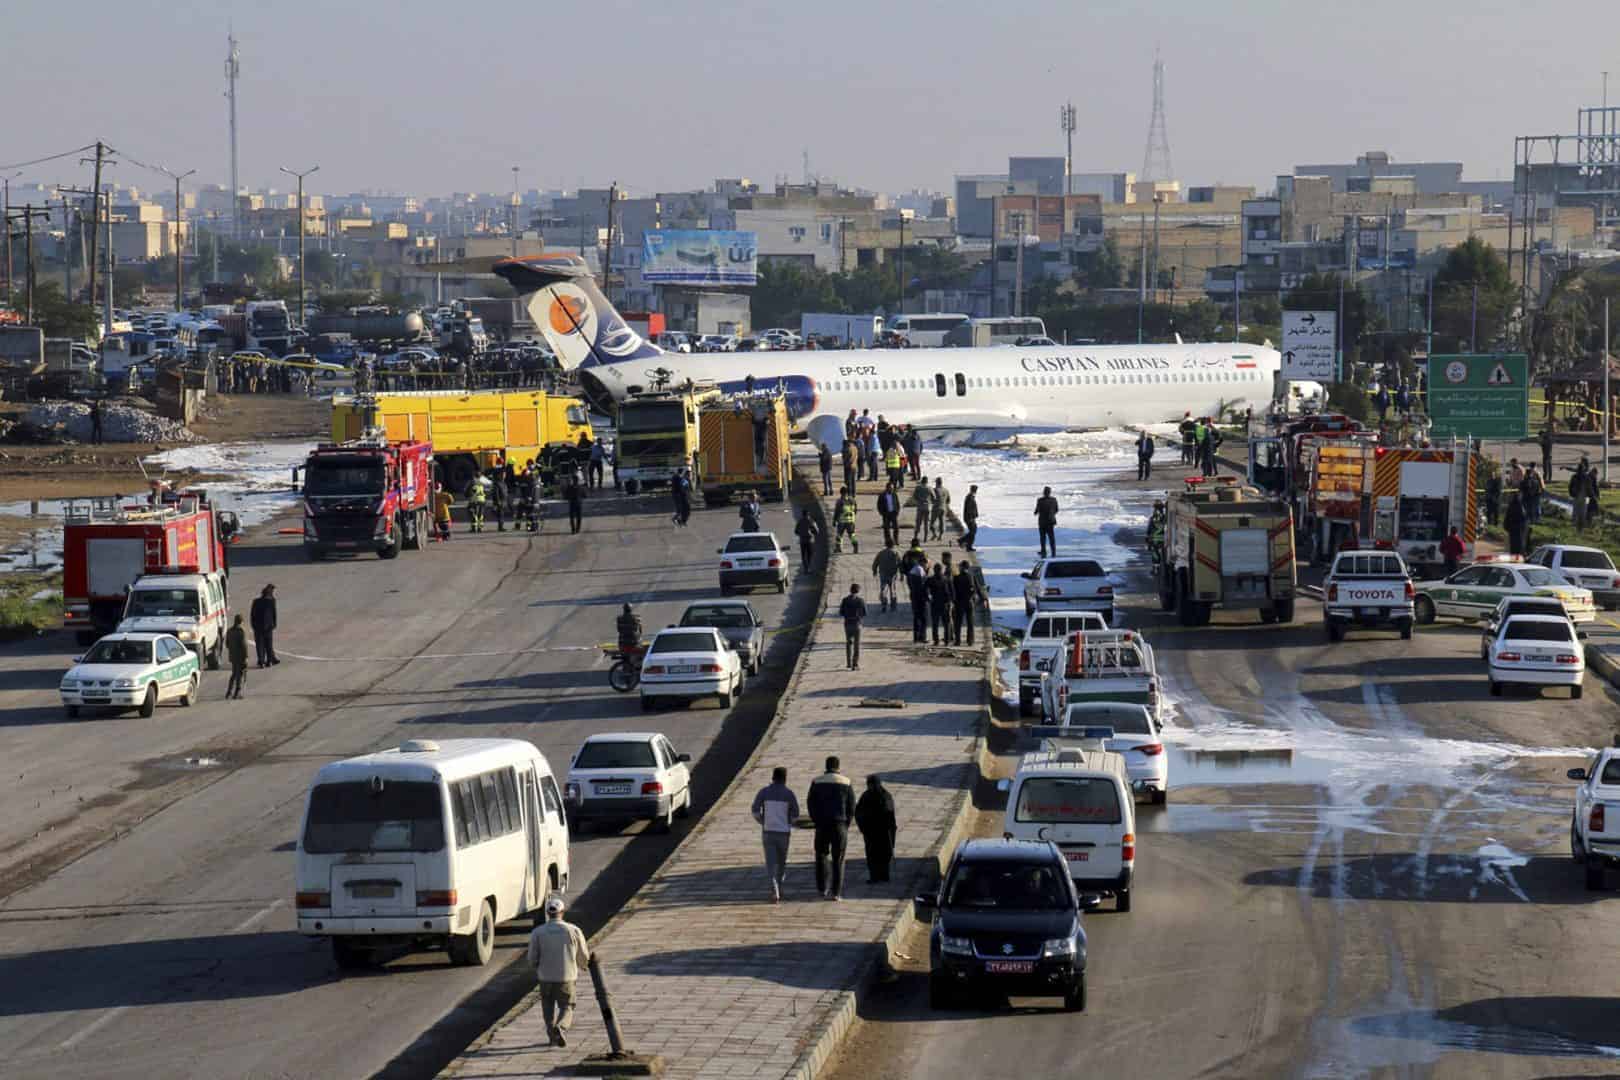 Plane skids off runway and into street in Iran